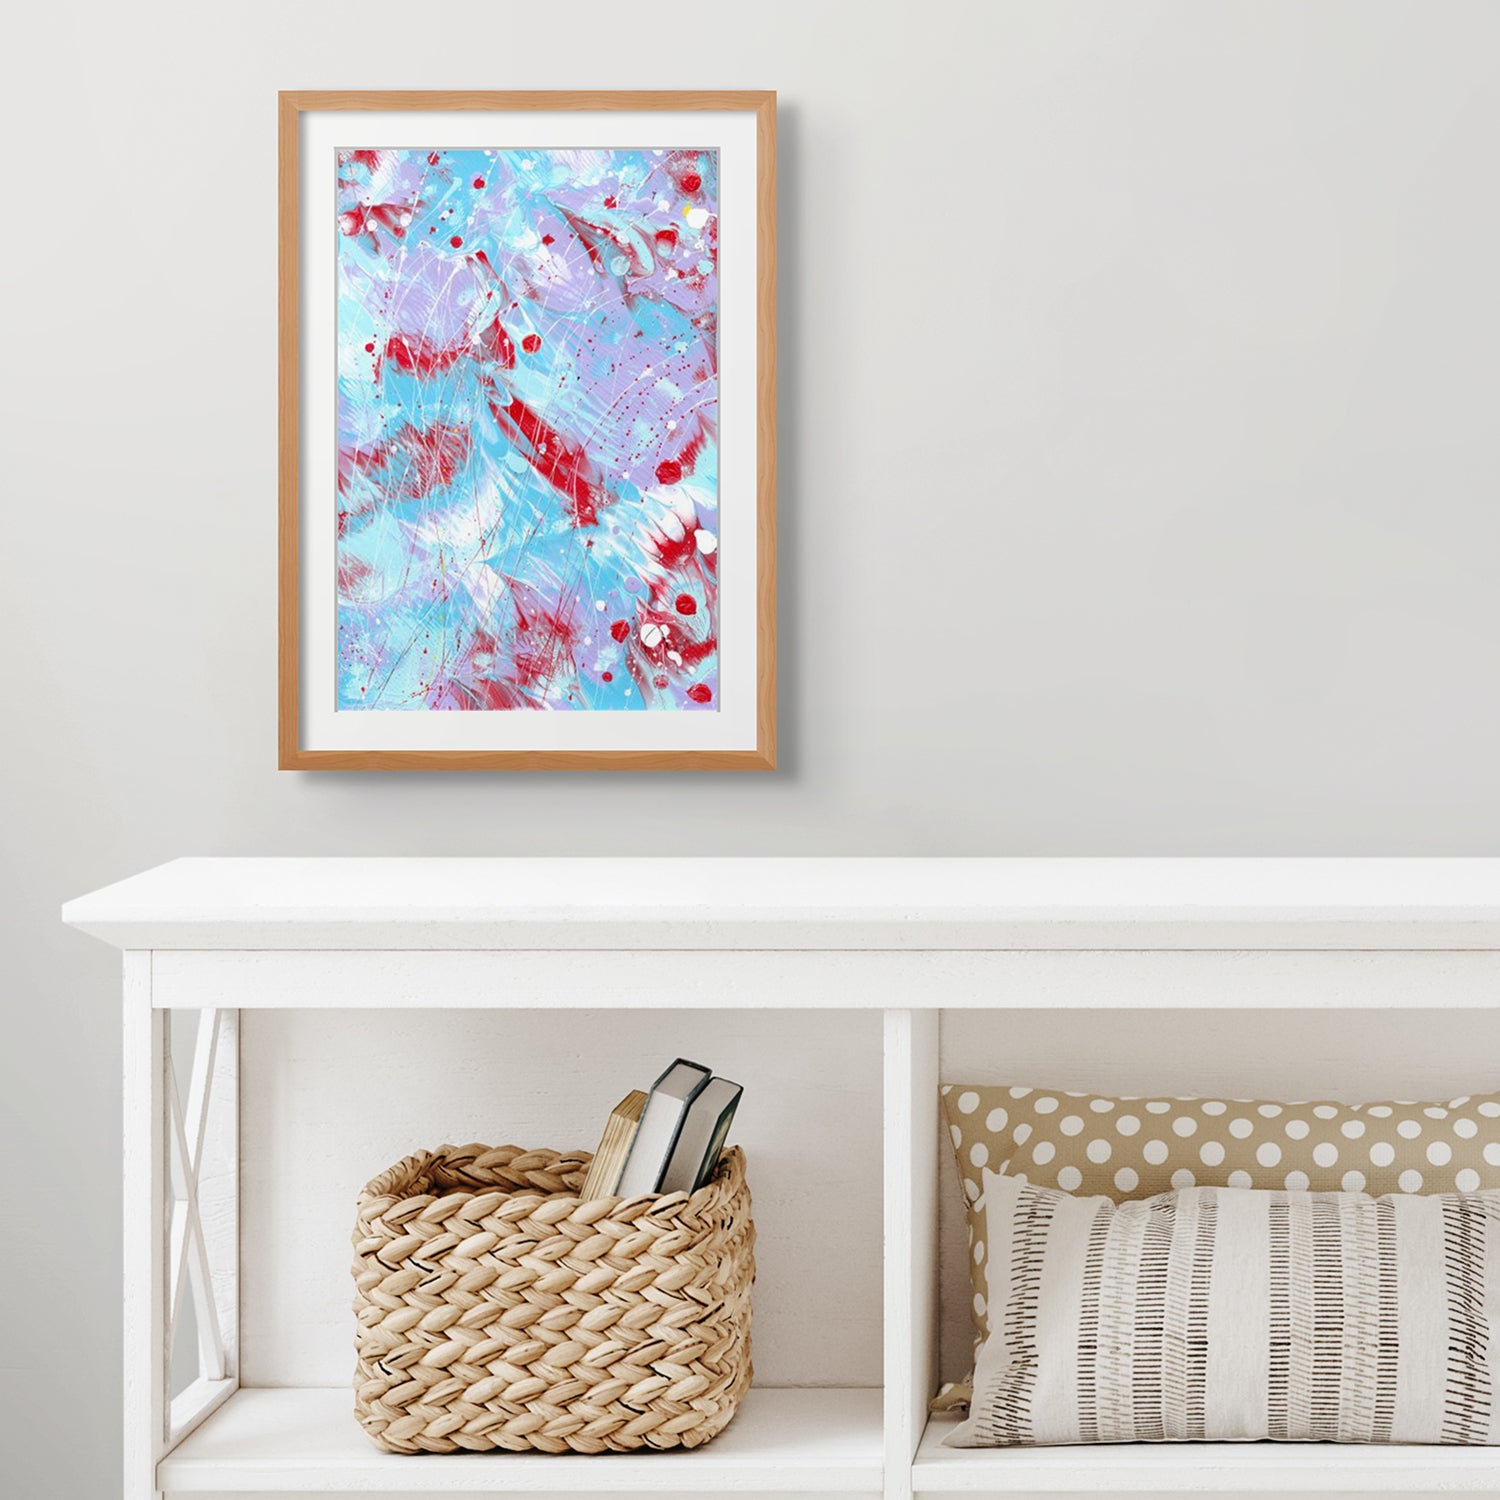 'Butterfly 6' Butterfly Series, Original Abstract Art by Bridget Bradley seen framed in oak and hanging above a white console. Unique, abstract fine art for sale now. 